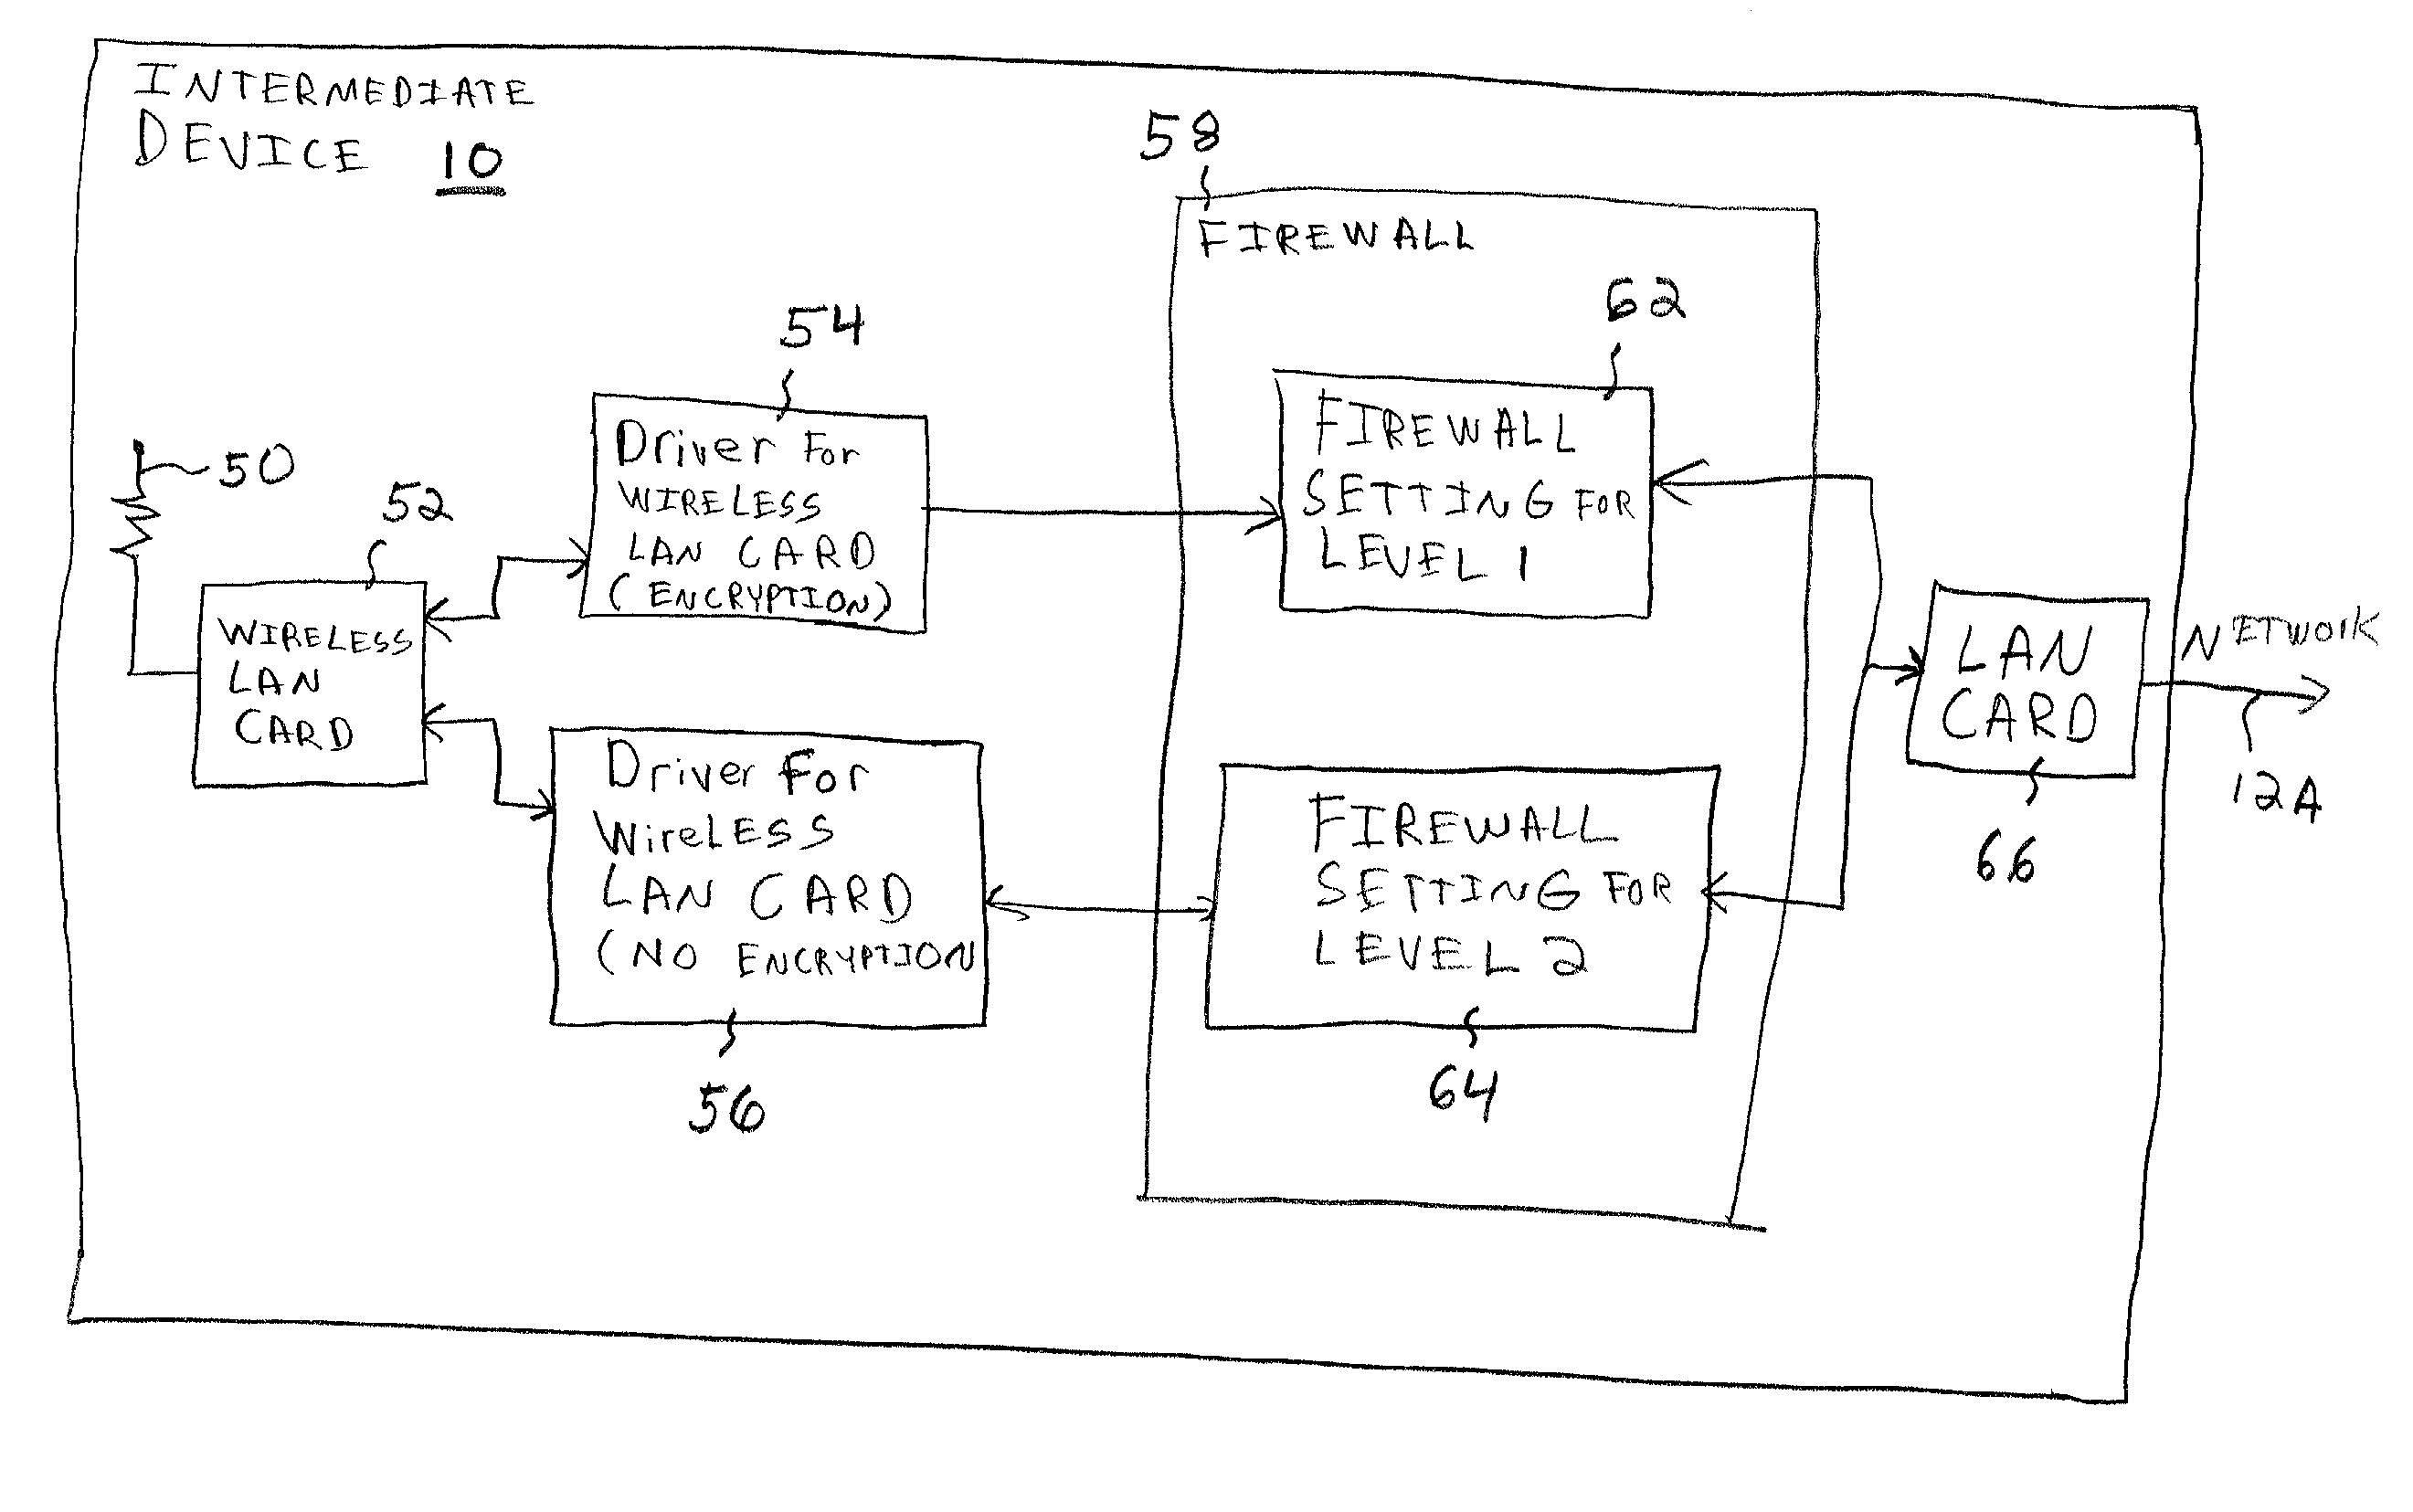 Method and system for controlling access to network resources based on connection security